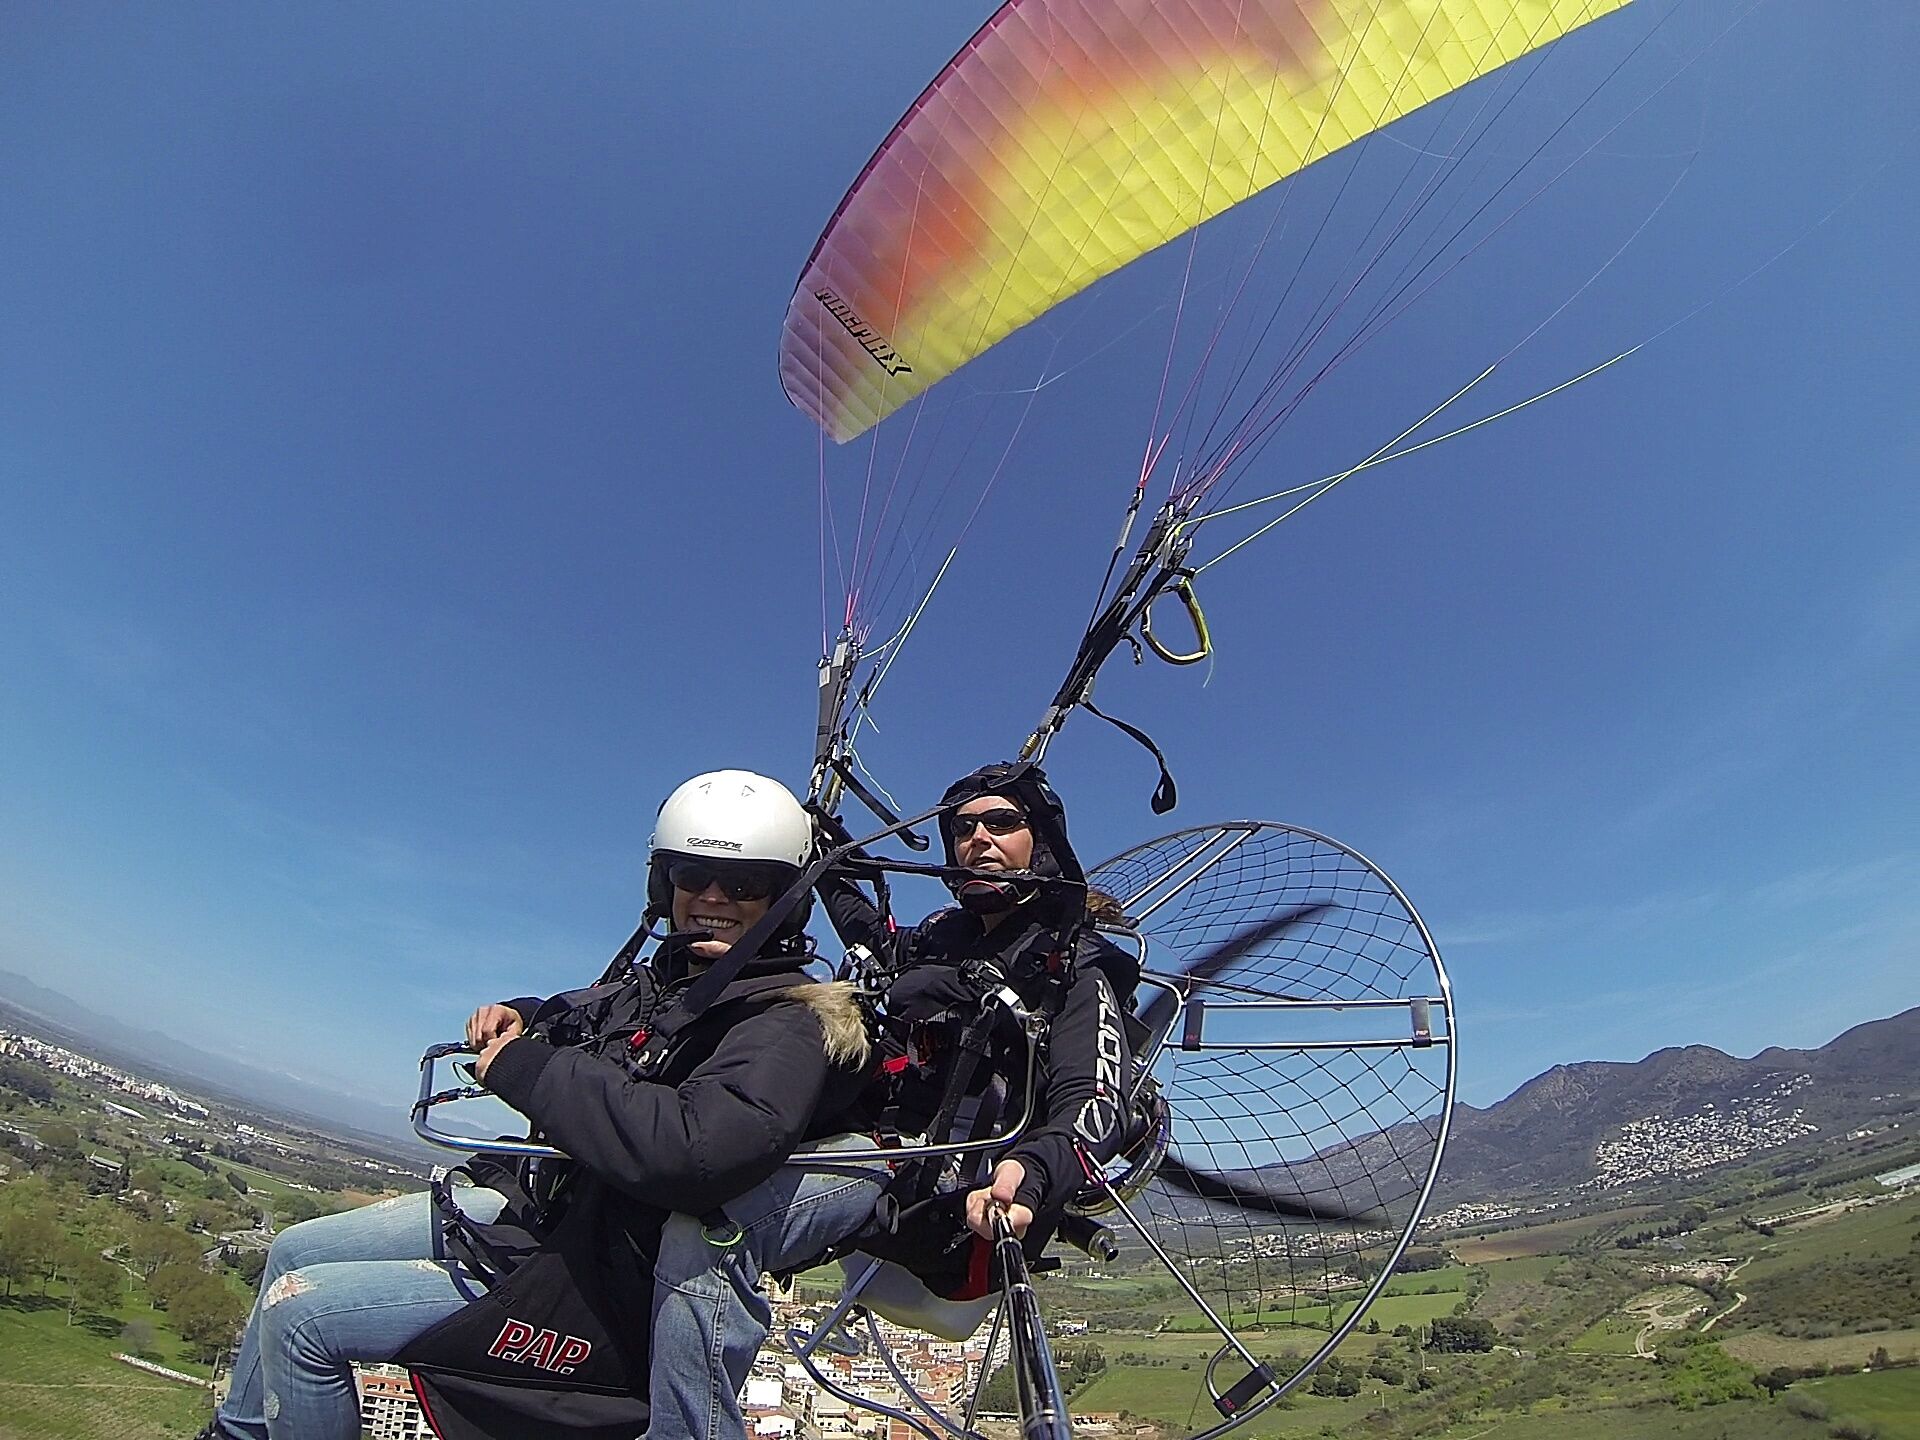 Ozone MagMax2 38 Tandem Power Glider for Paramotoring and PPG Trikes 